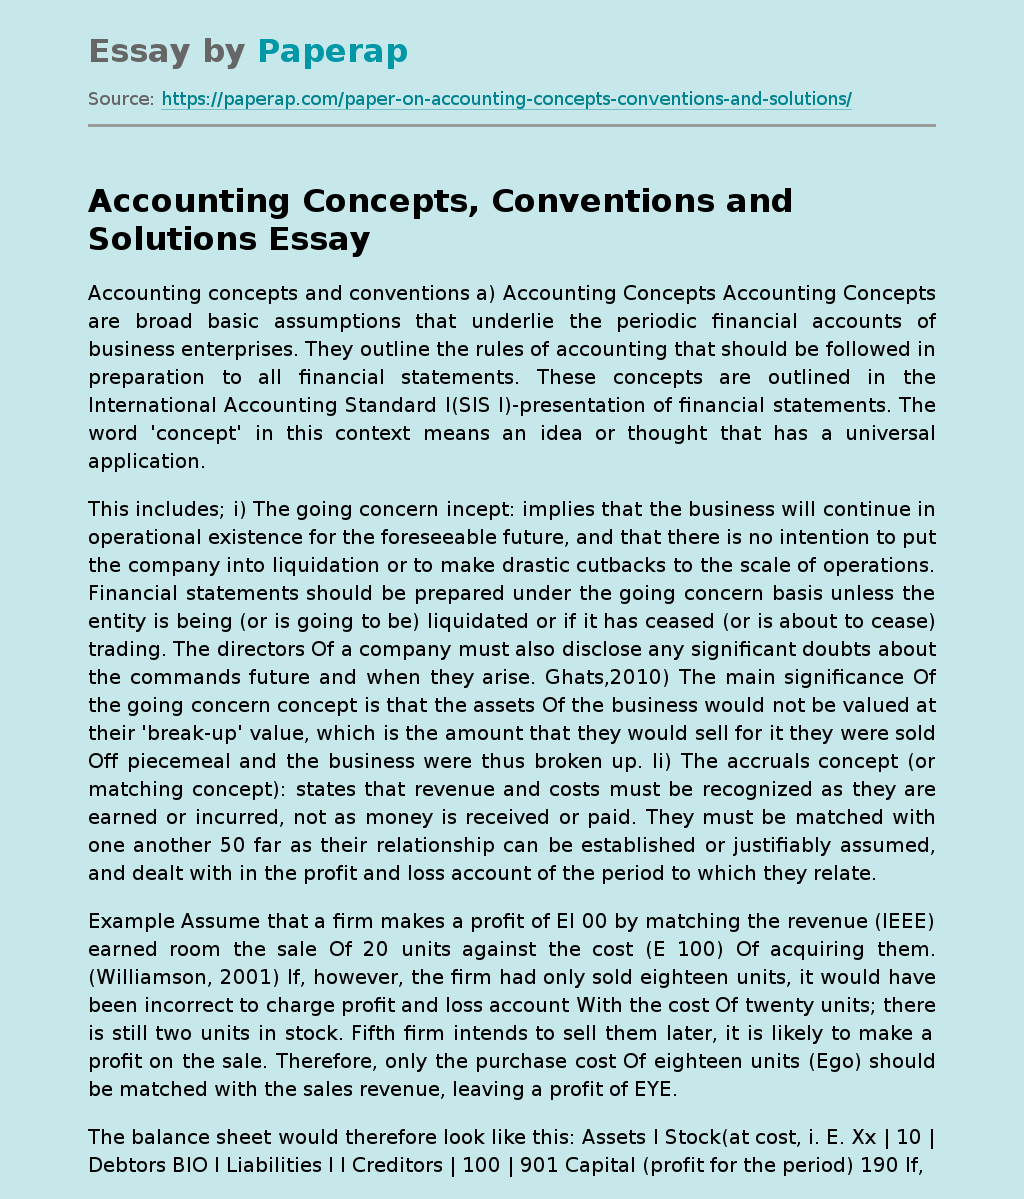 Accounting Concepts, Conventions and Solutions